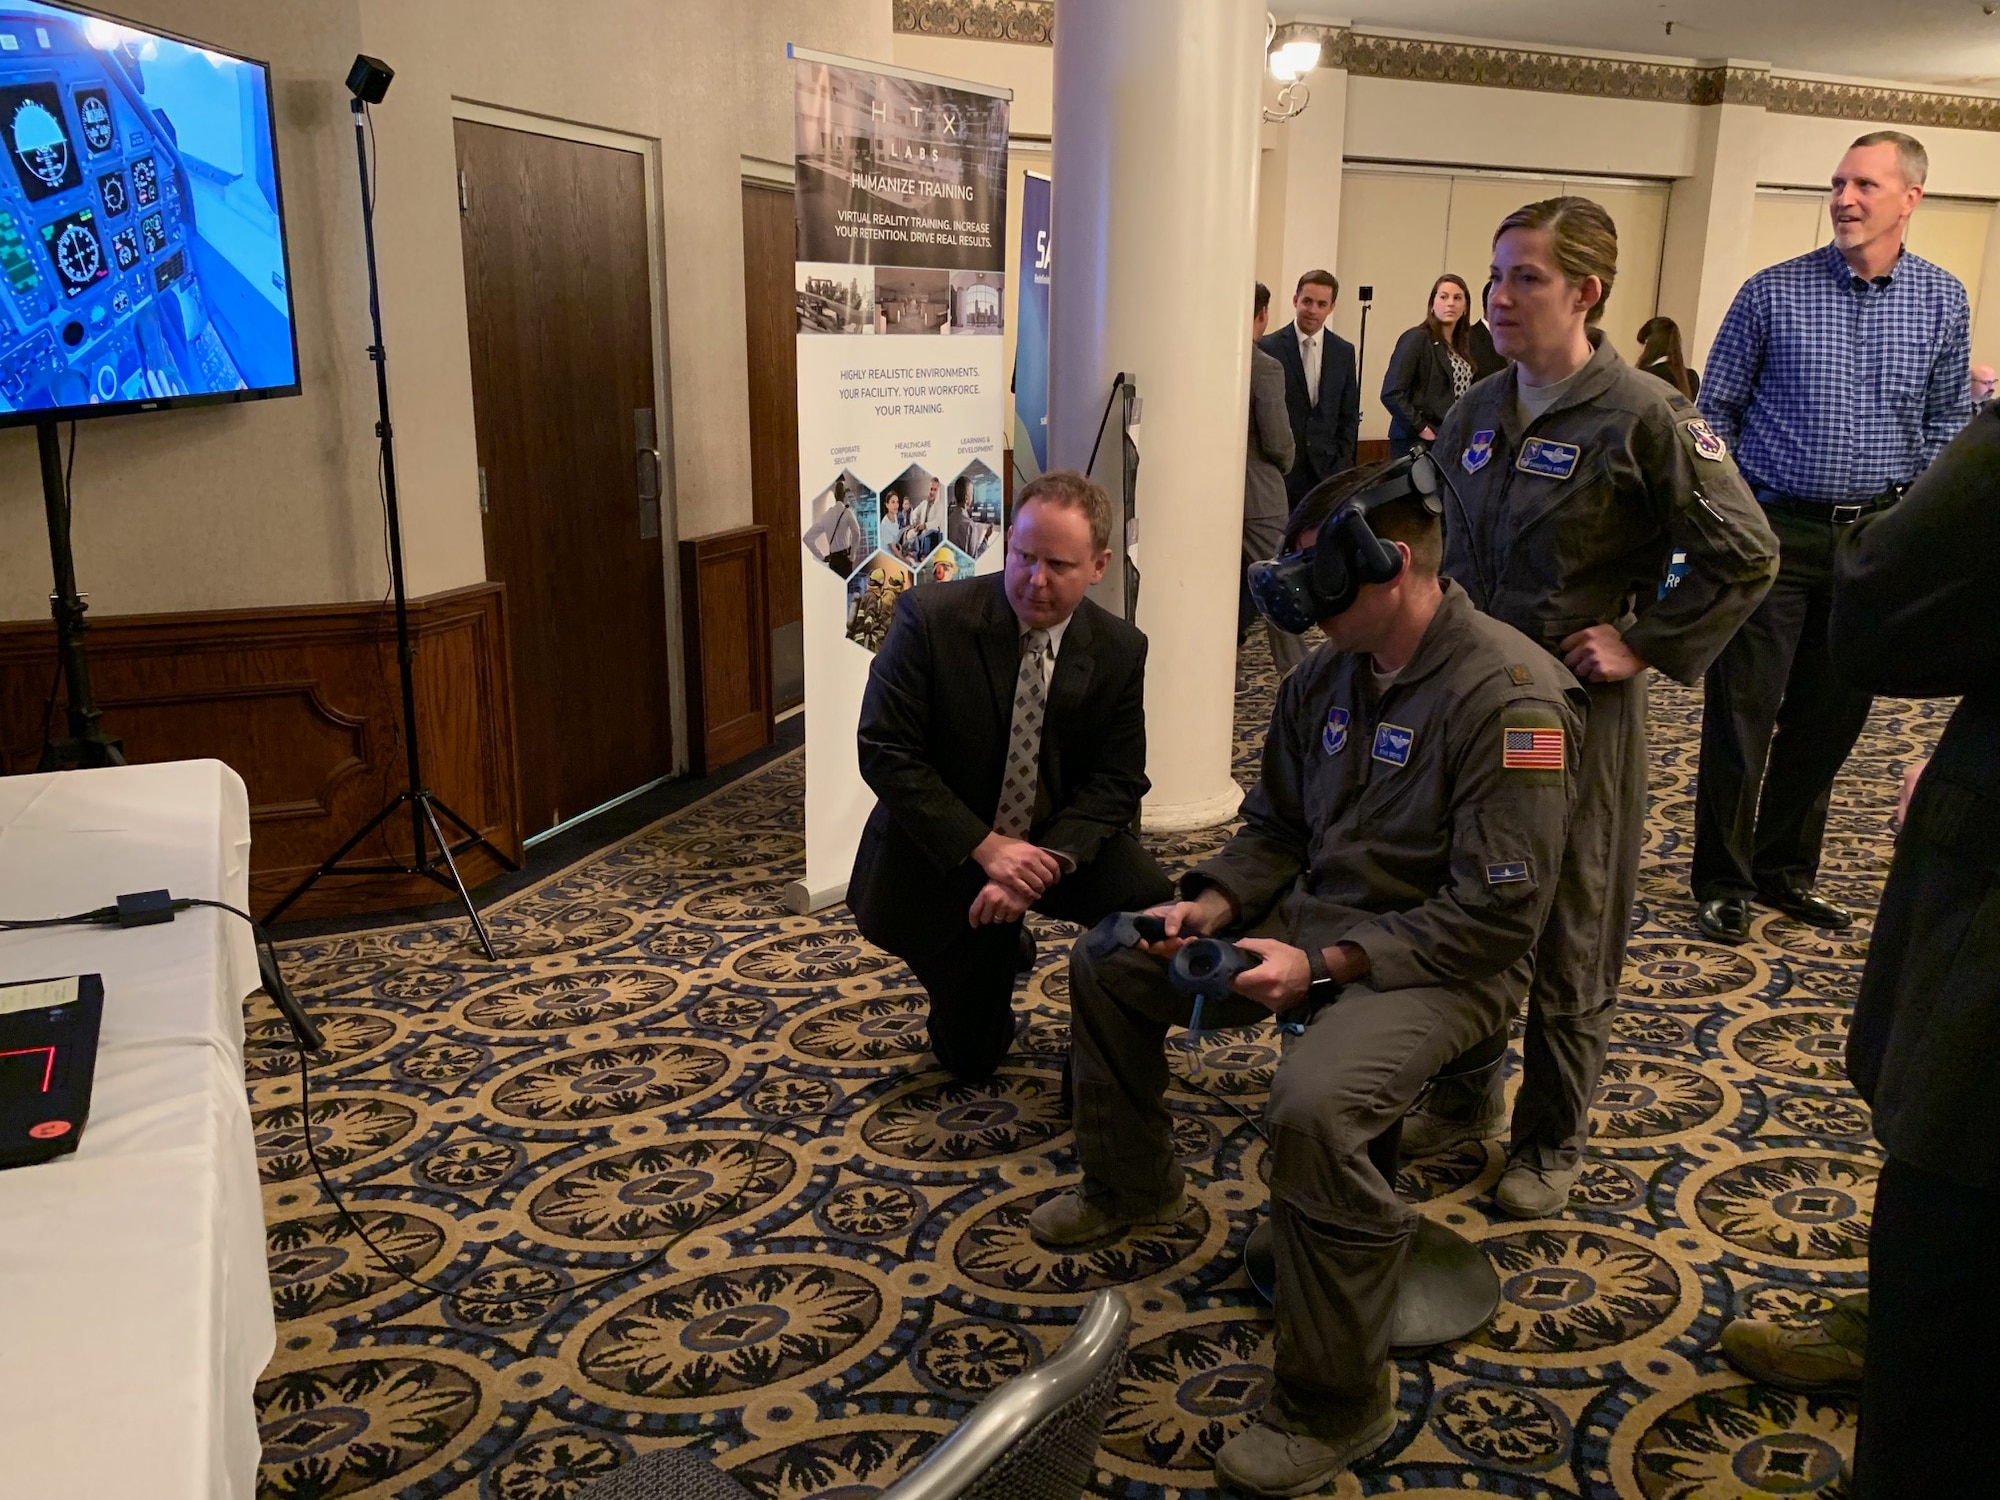 Col. Samantha Weeks (right), 14th Flying Training Wing commander, and Maj. Ryan Brewer (seated), 14th FTW SparkCell director, sample emergency procedures augmented-reality technology at the PTN Technology Expo at Joint Base San Antonio-Randolph, Texas, March 12, 2019.  Flying training wings will formally begin integrating innovations from PTN into the undergraduate pilot training curriculum beginning May 31, 2019.